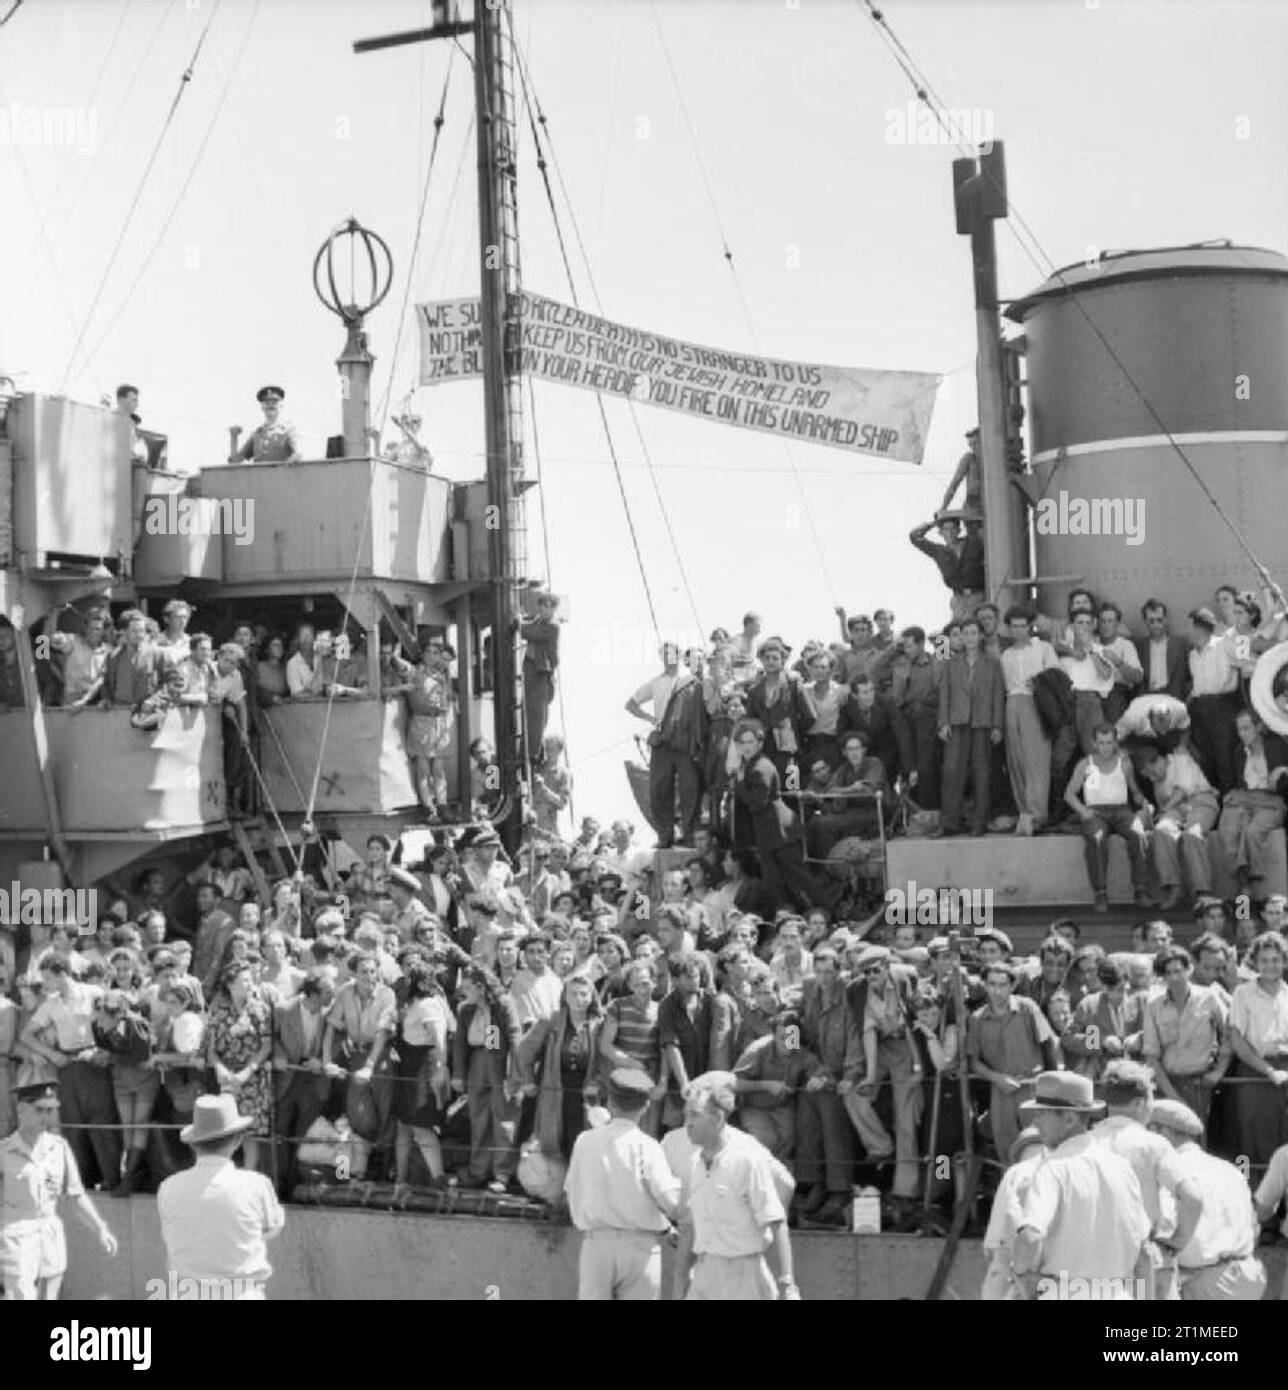 The British Mandate in Palestine 1917-1948 Illegal immigrants arriving into Palestine: Jewish refugees stand tightly packed on board the JOSIAH WEDGWOOD on arrival in Haifa harbour. From the funnel to the masts is tied a banner declaring 'We survived Hitler - Death is no stranger to us - Nothing can keep us from our Jewish homeland - The blame is on your head if you fire on this unarmed ship'. Stock Photo